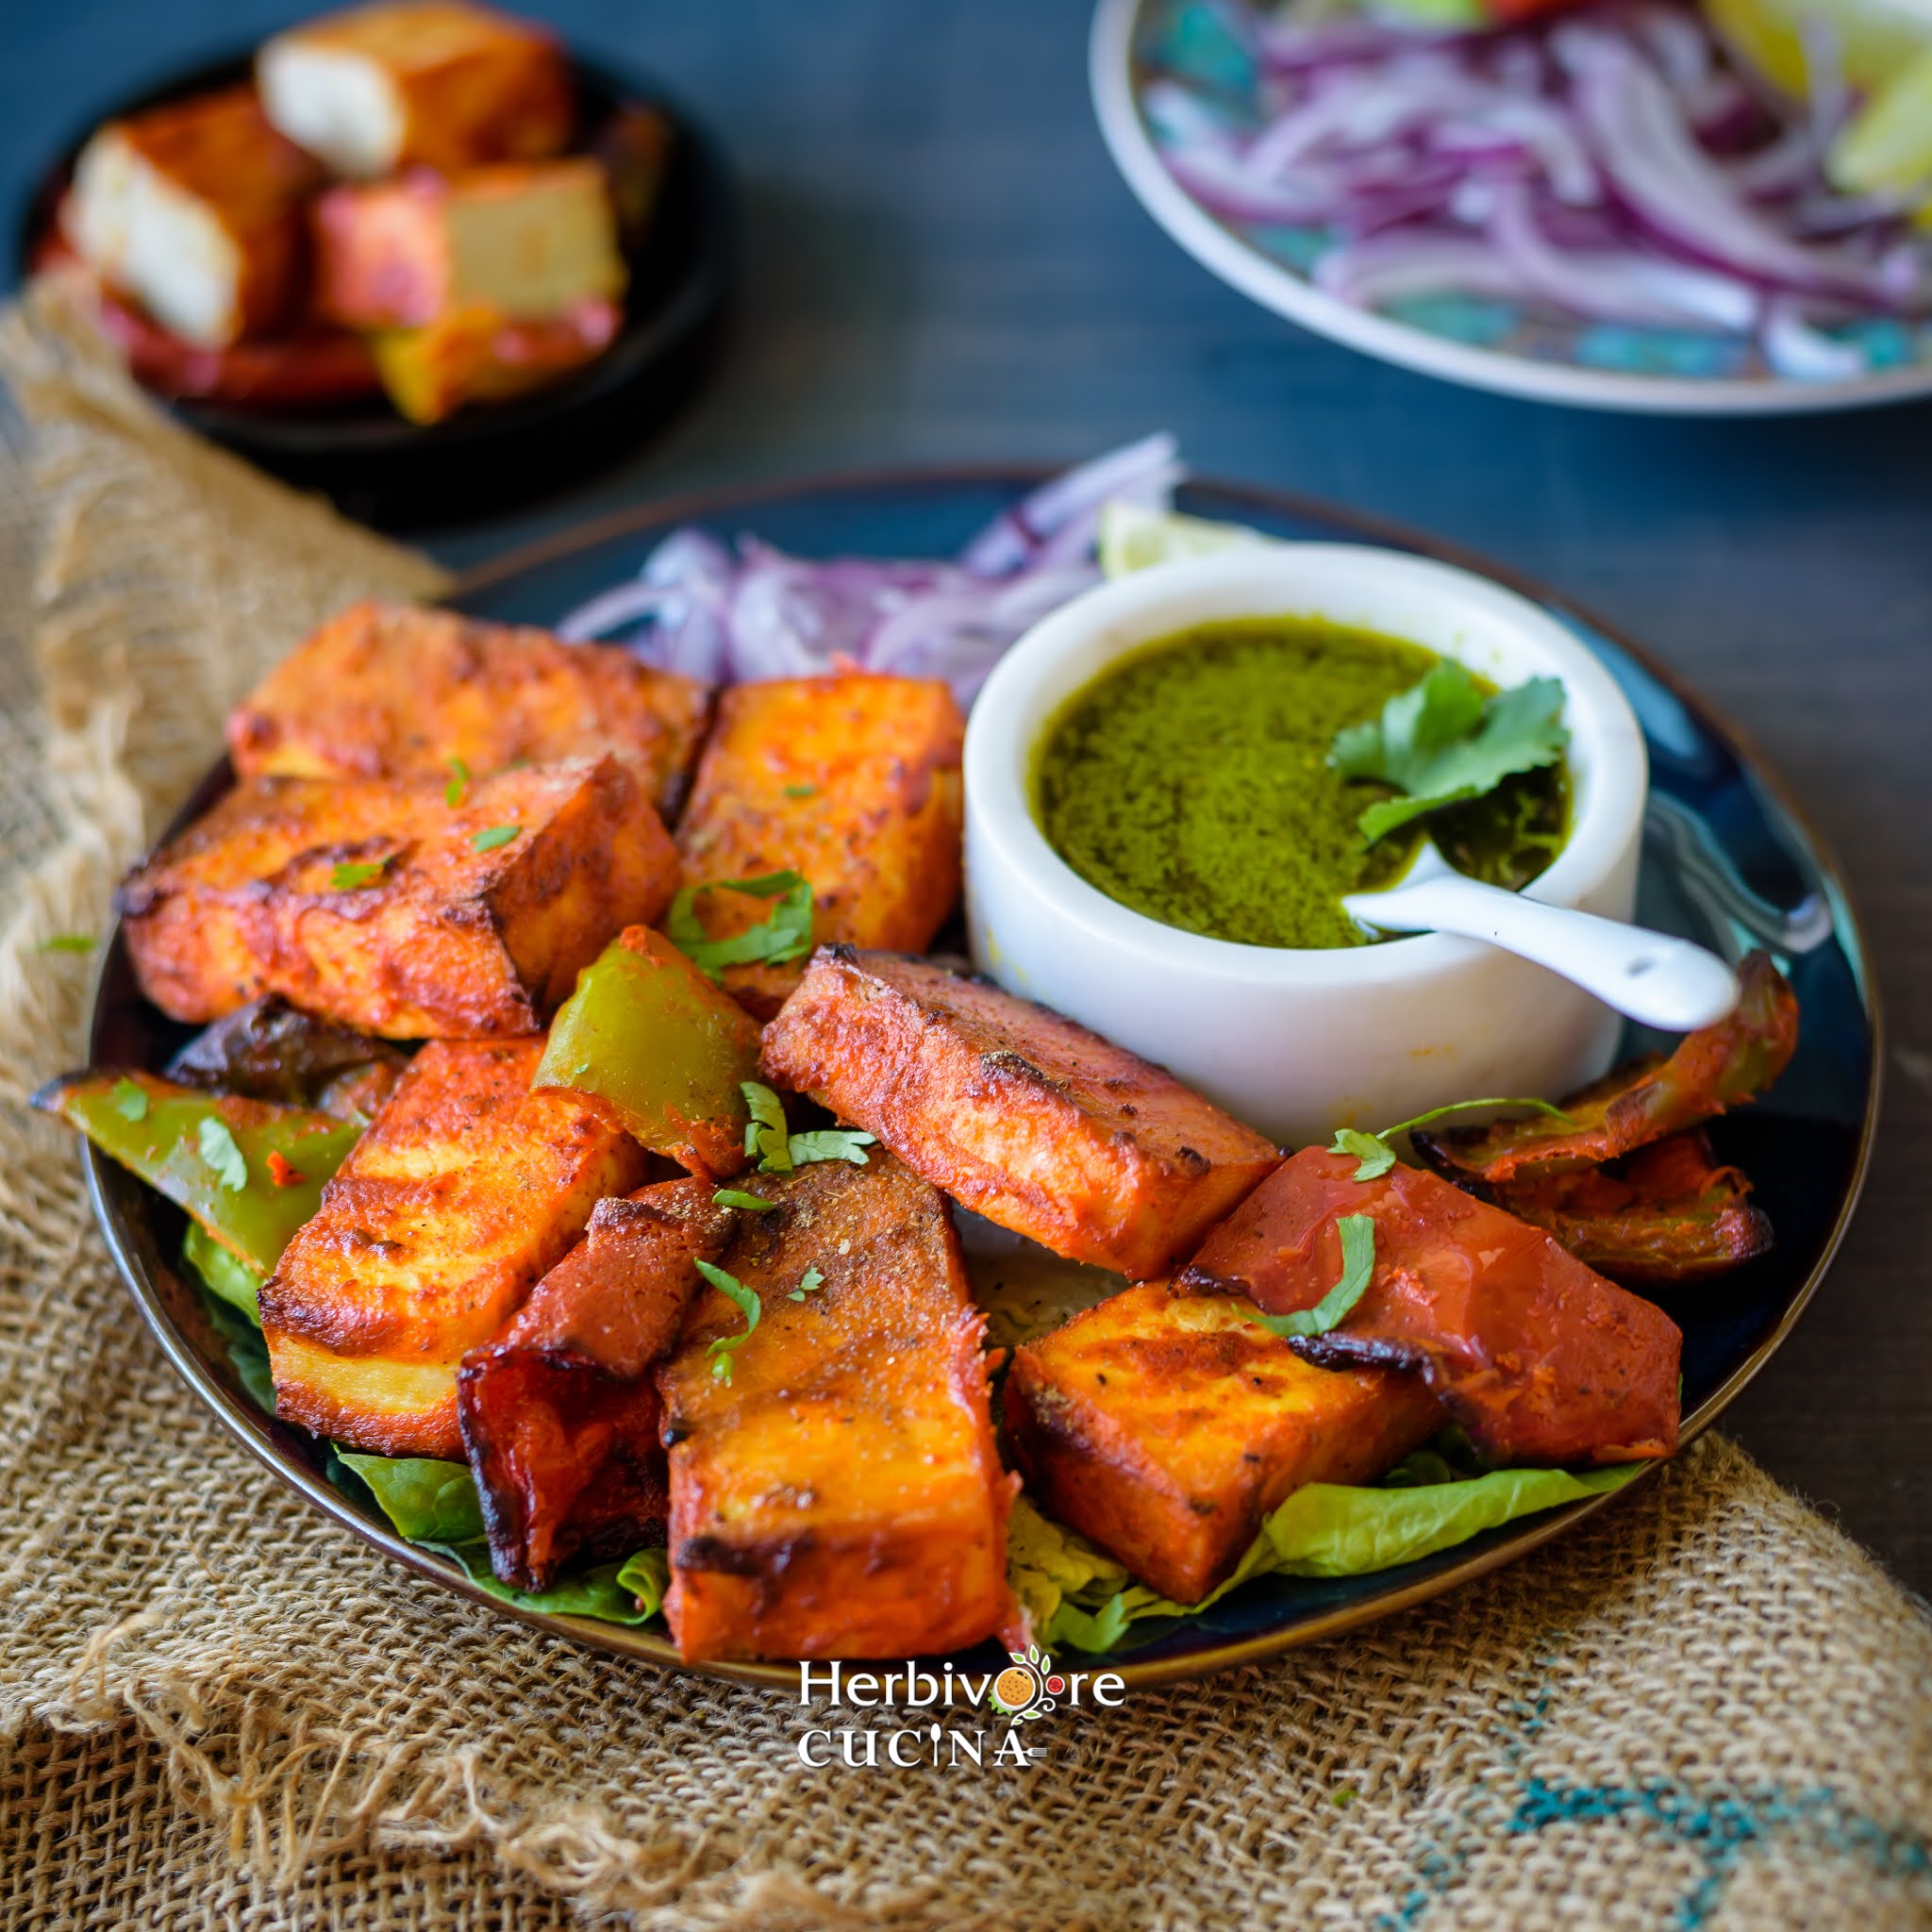 Slices of tofu tikka arranged on a blue plate with green cilantro chutney and sliced onions around it.